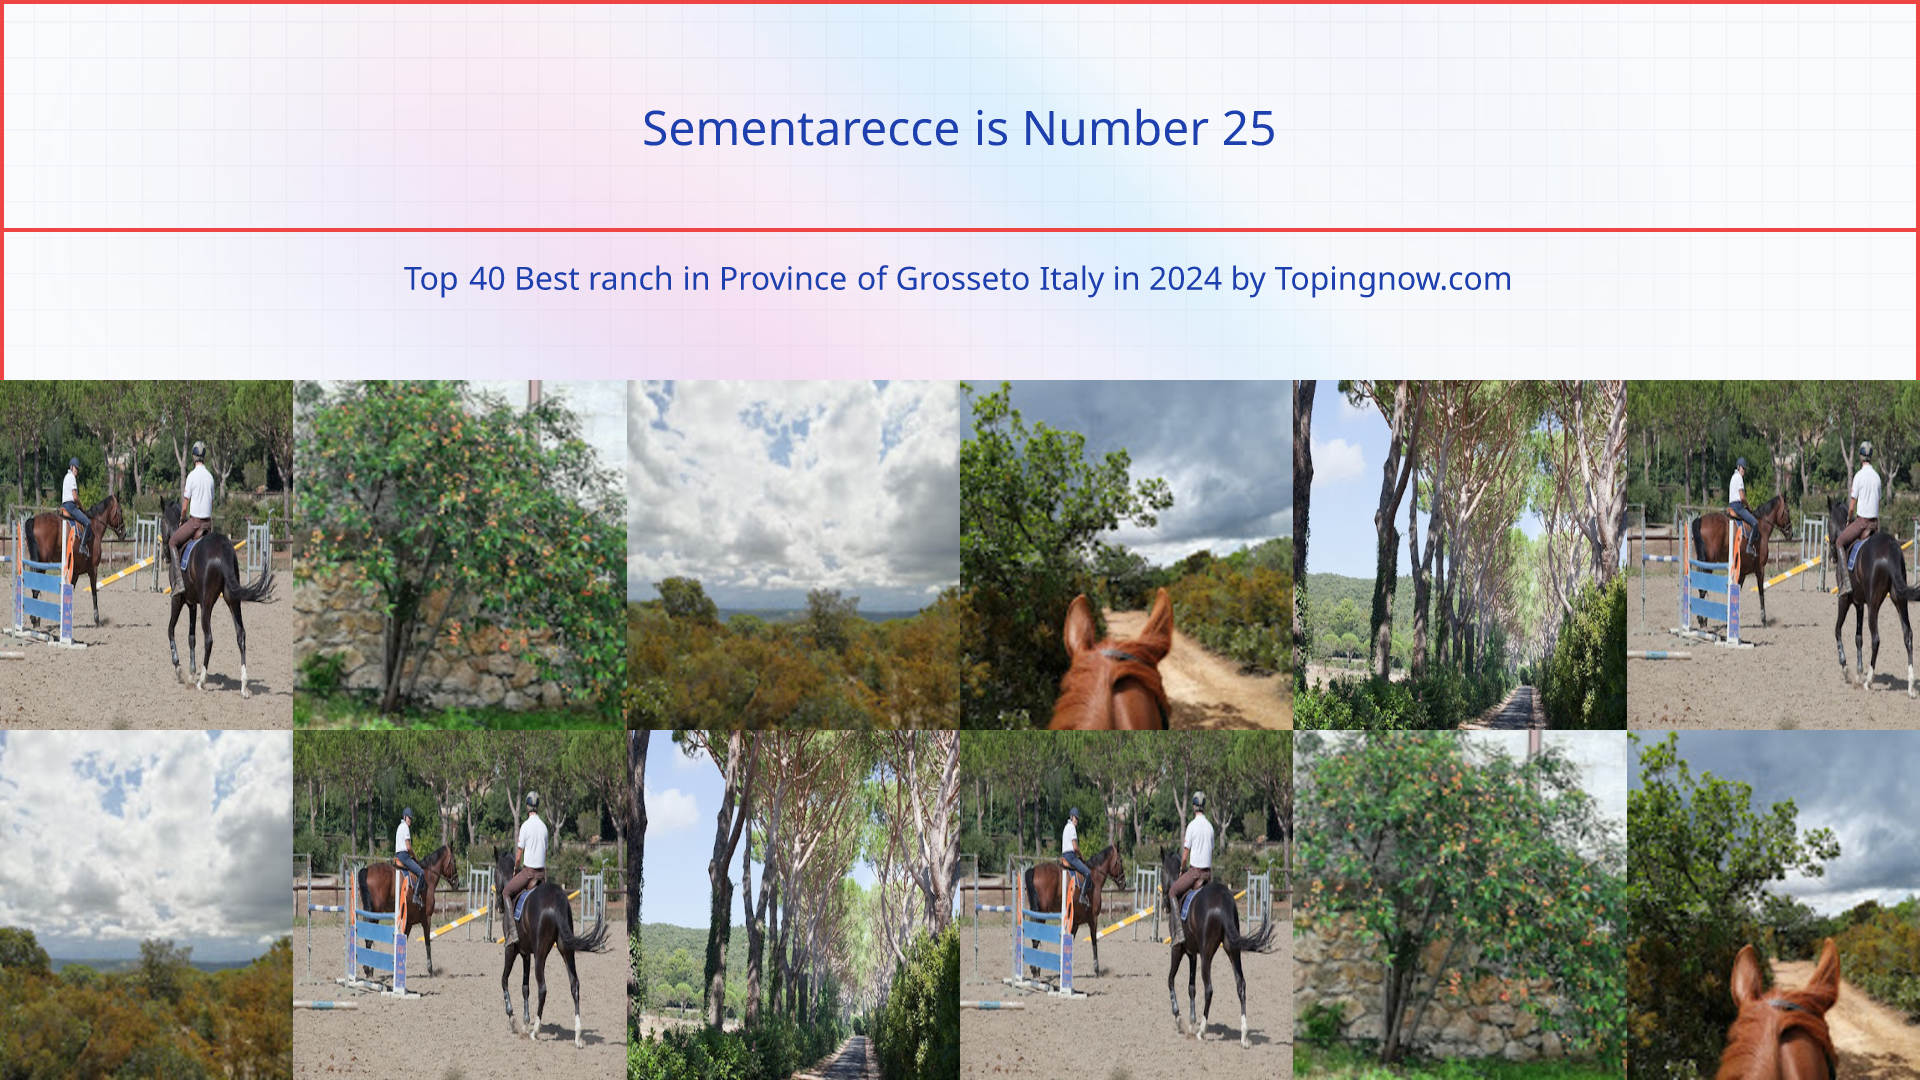 Sementarecce: Top 40 Best ranch in Province of Grosseto Italy in 2024